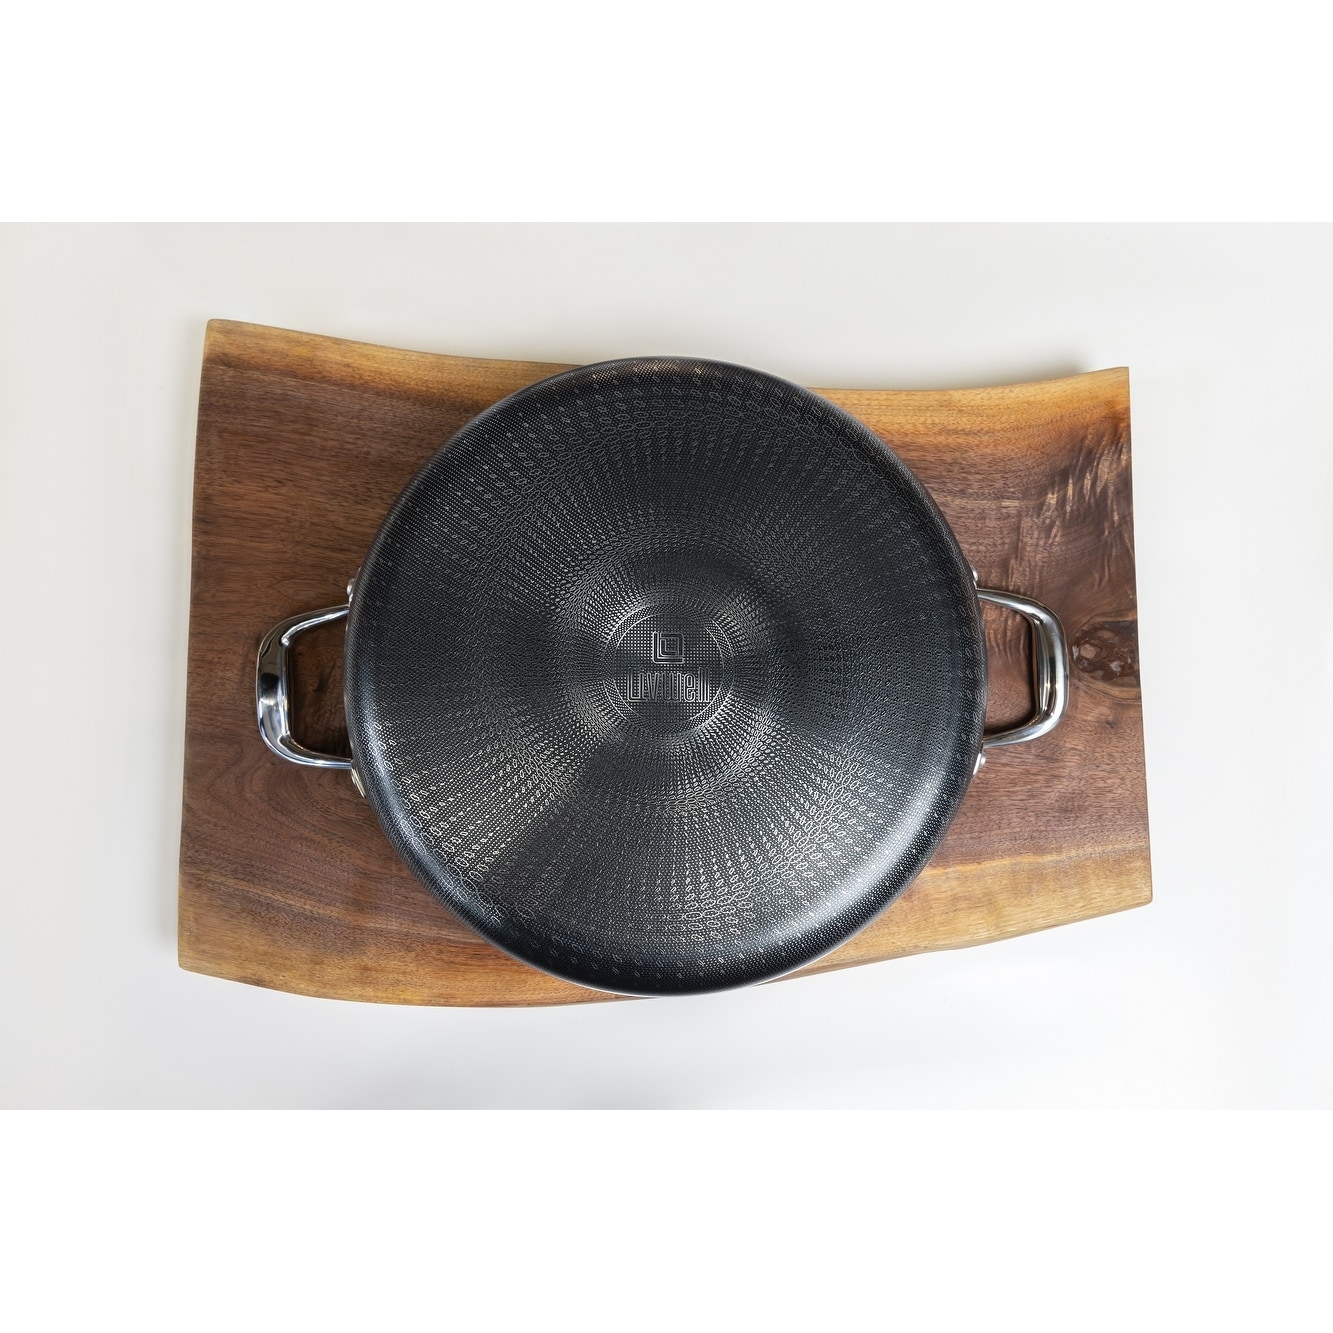 14 DiamondClad™ Thermowave™ Hybrid Everything Pan – Livwell Brands